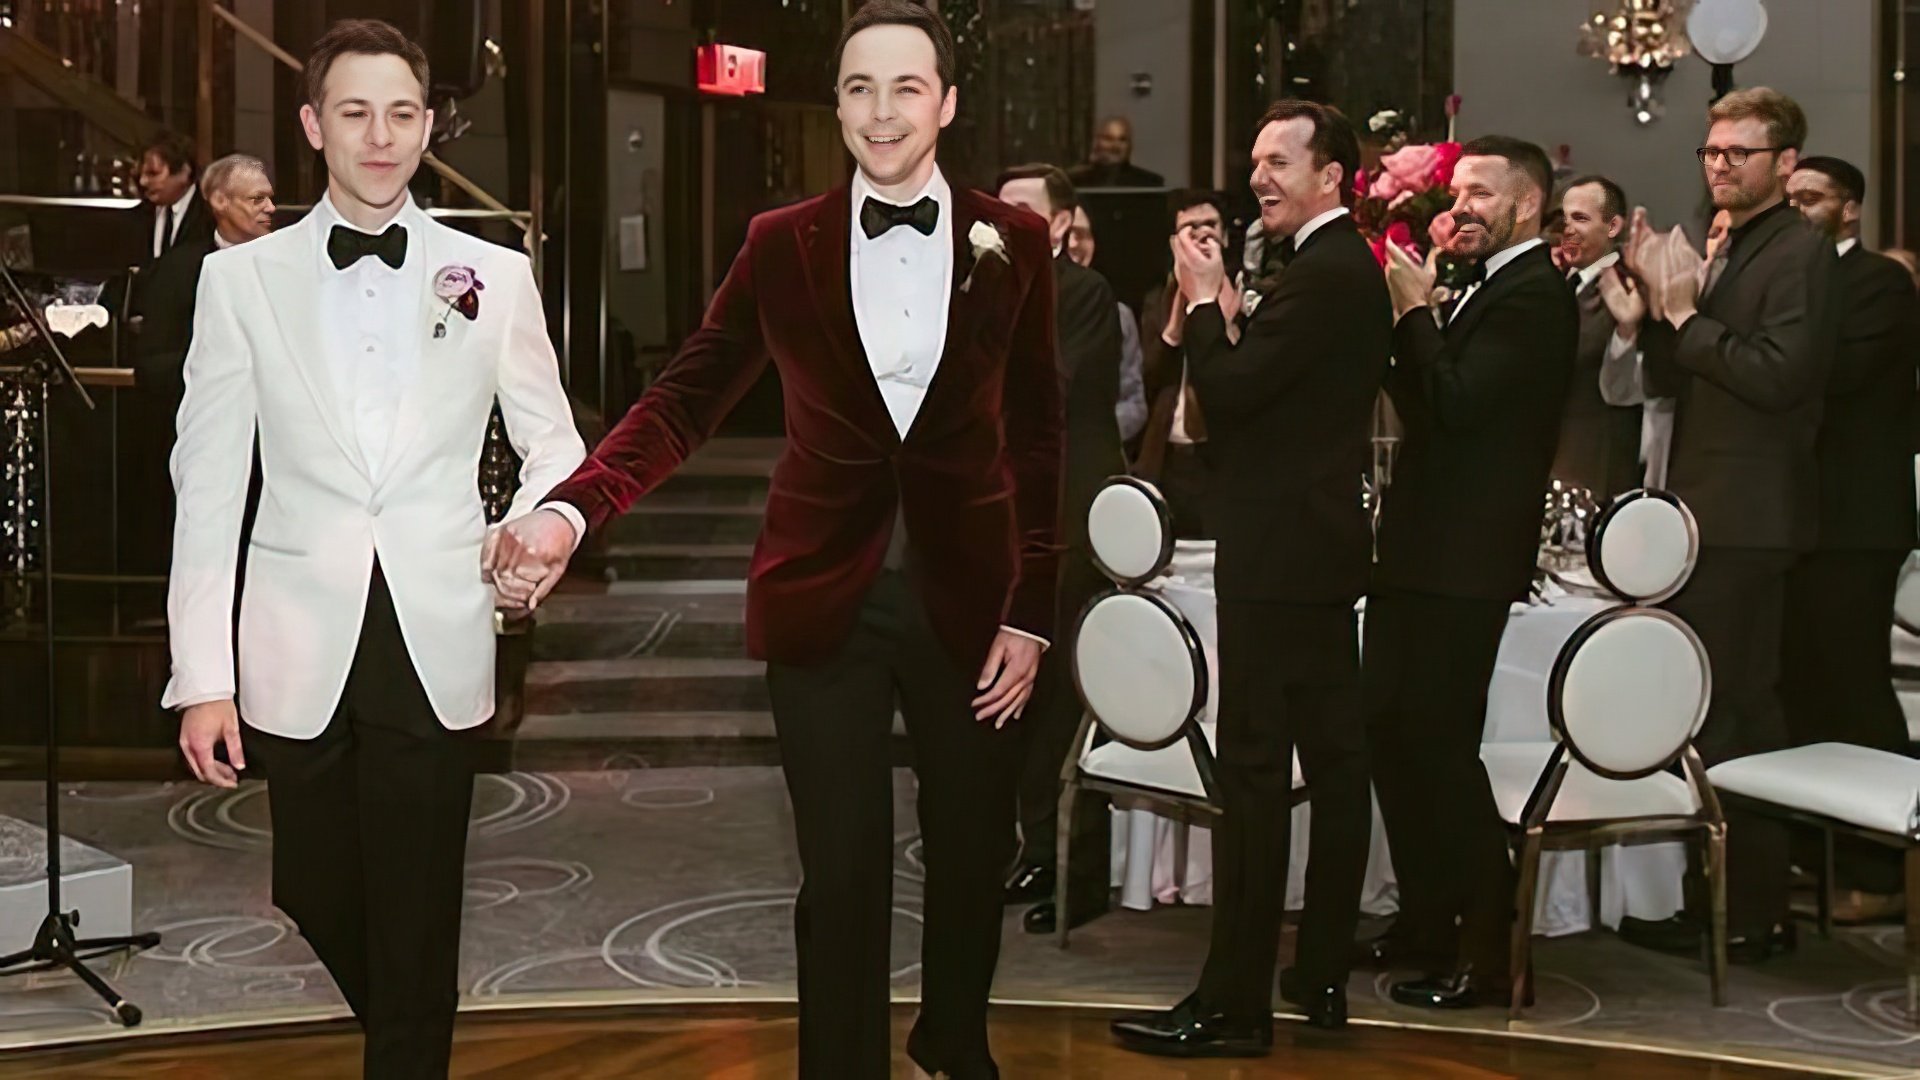 Jim Parsons and Todd Spiewak`s marriage